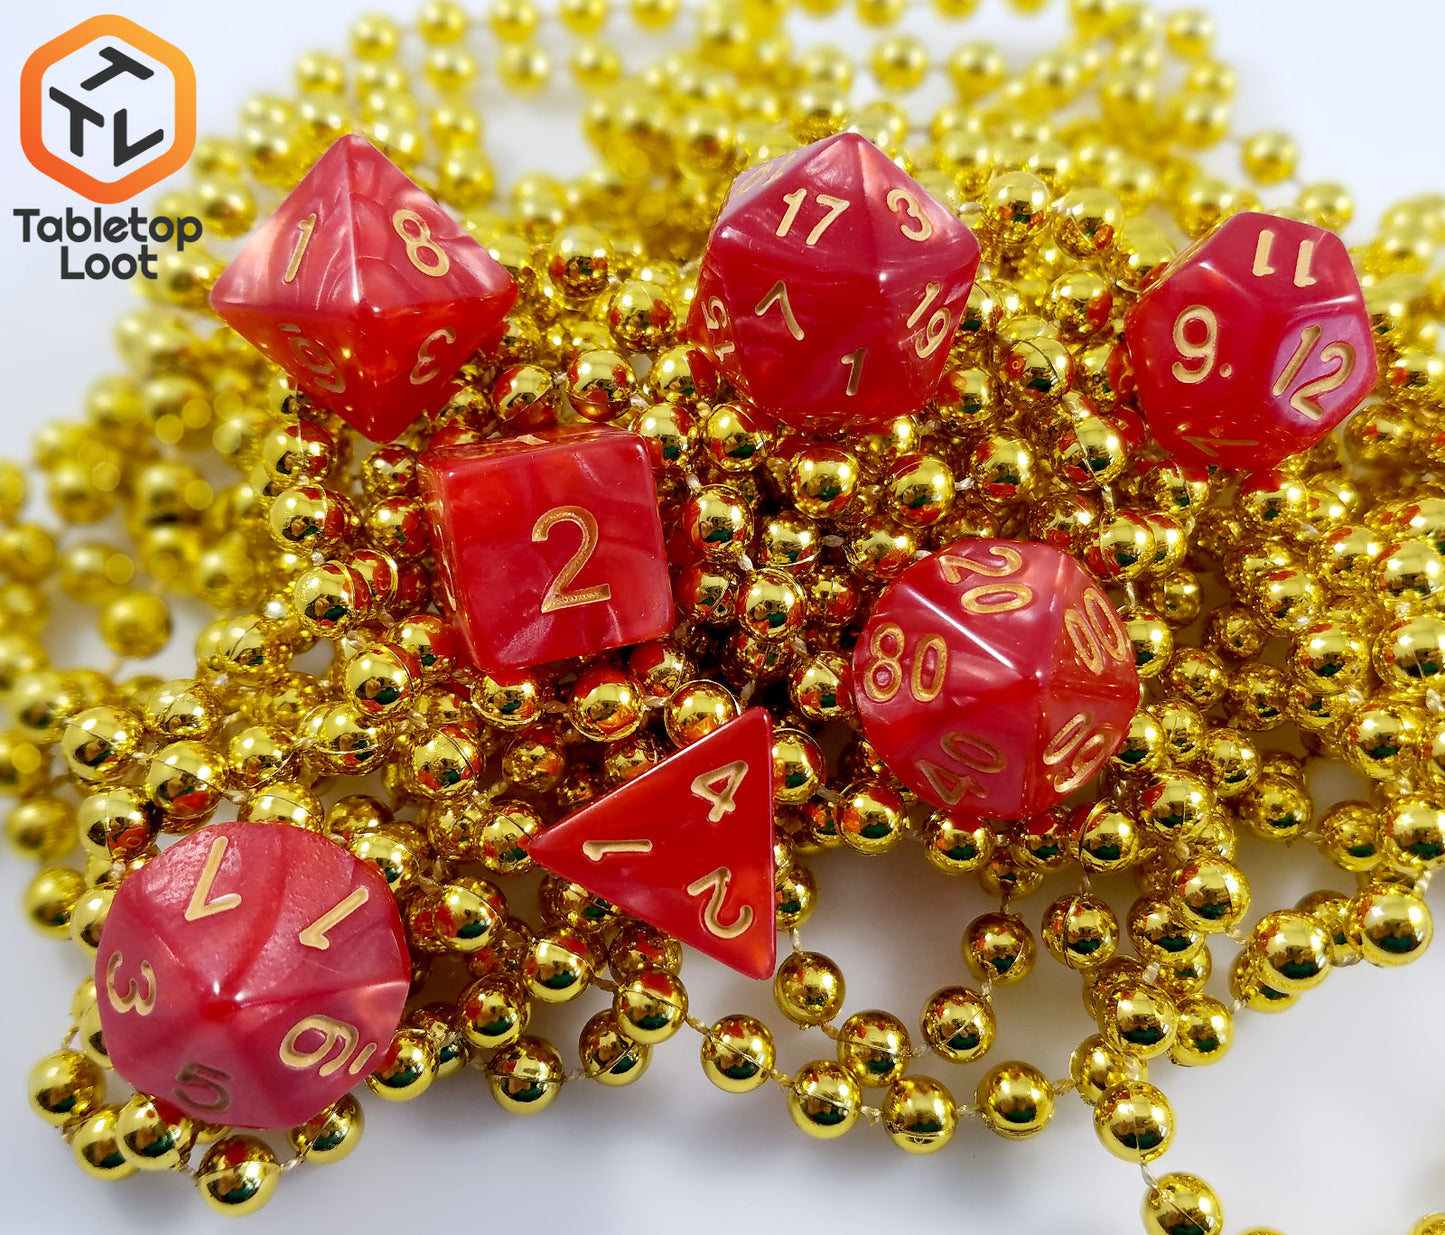 The Atomic Cinnamon 7 piece dice set from Tabletop Loot with swirls of red resin and gold numbering.